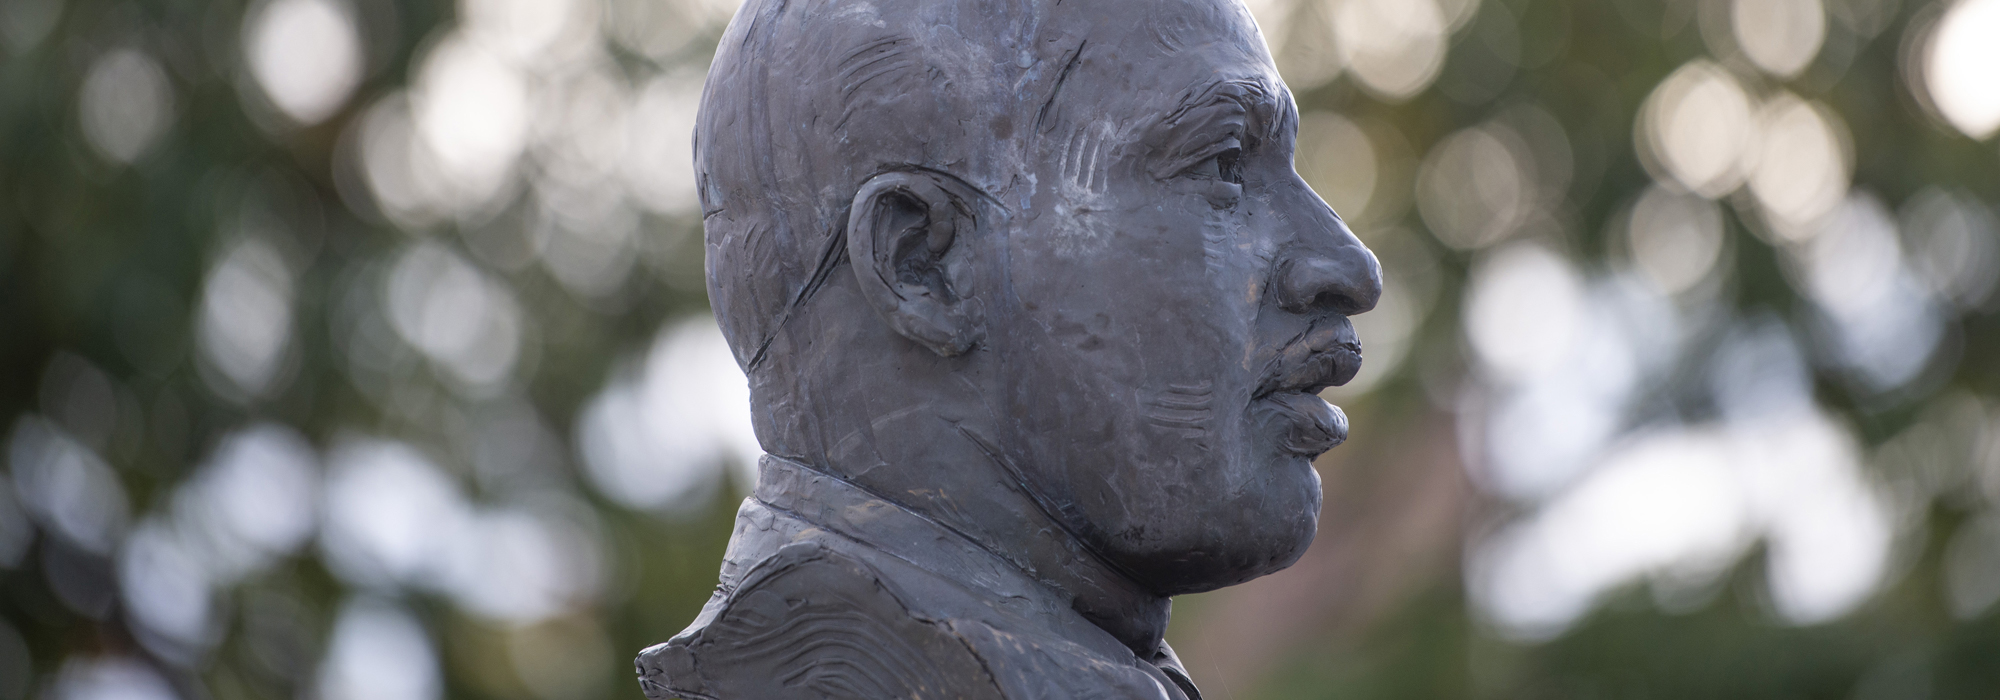 Bust of Martin Luther King, Jr. in MLK commons.